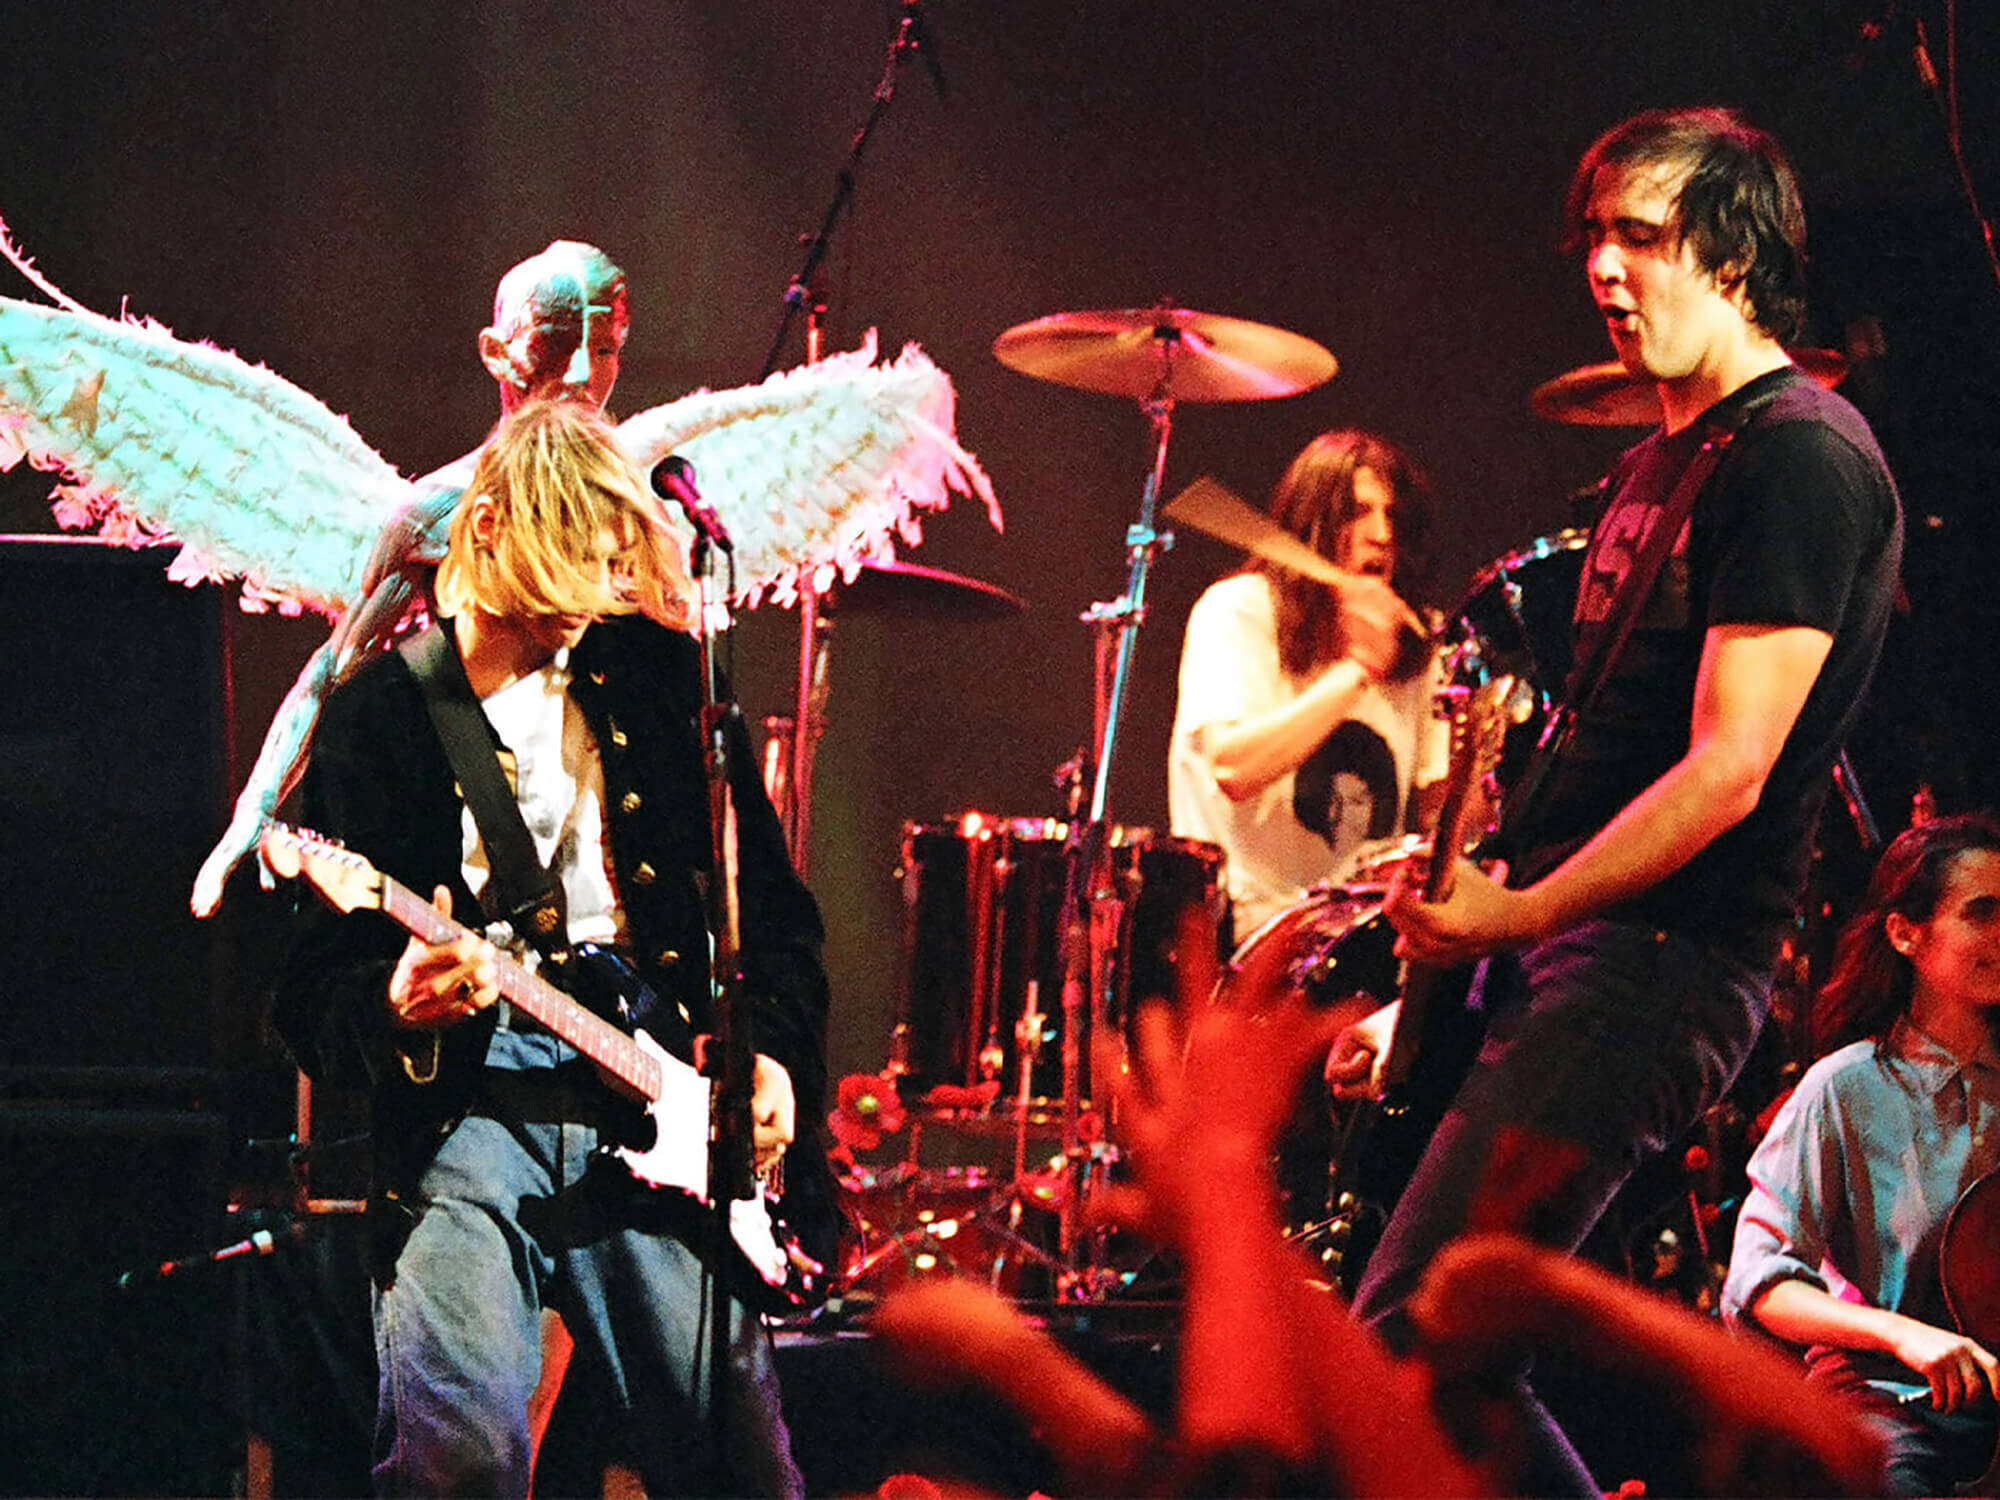 Nirvana performing at MTV’s Live and Loud in 1993 by Jeff Kravitz/FilmMagic